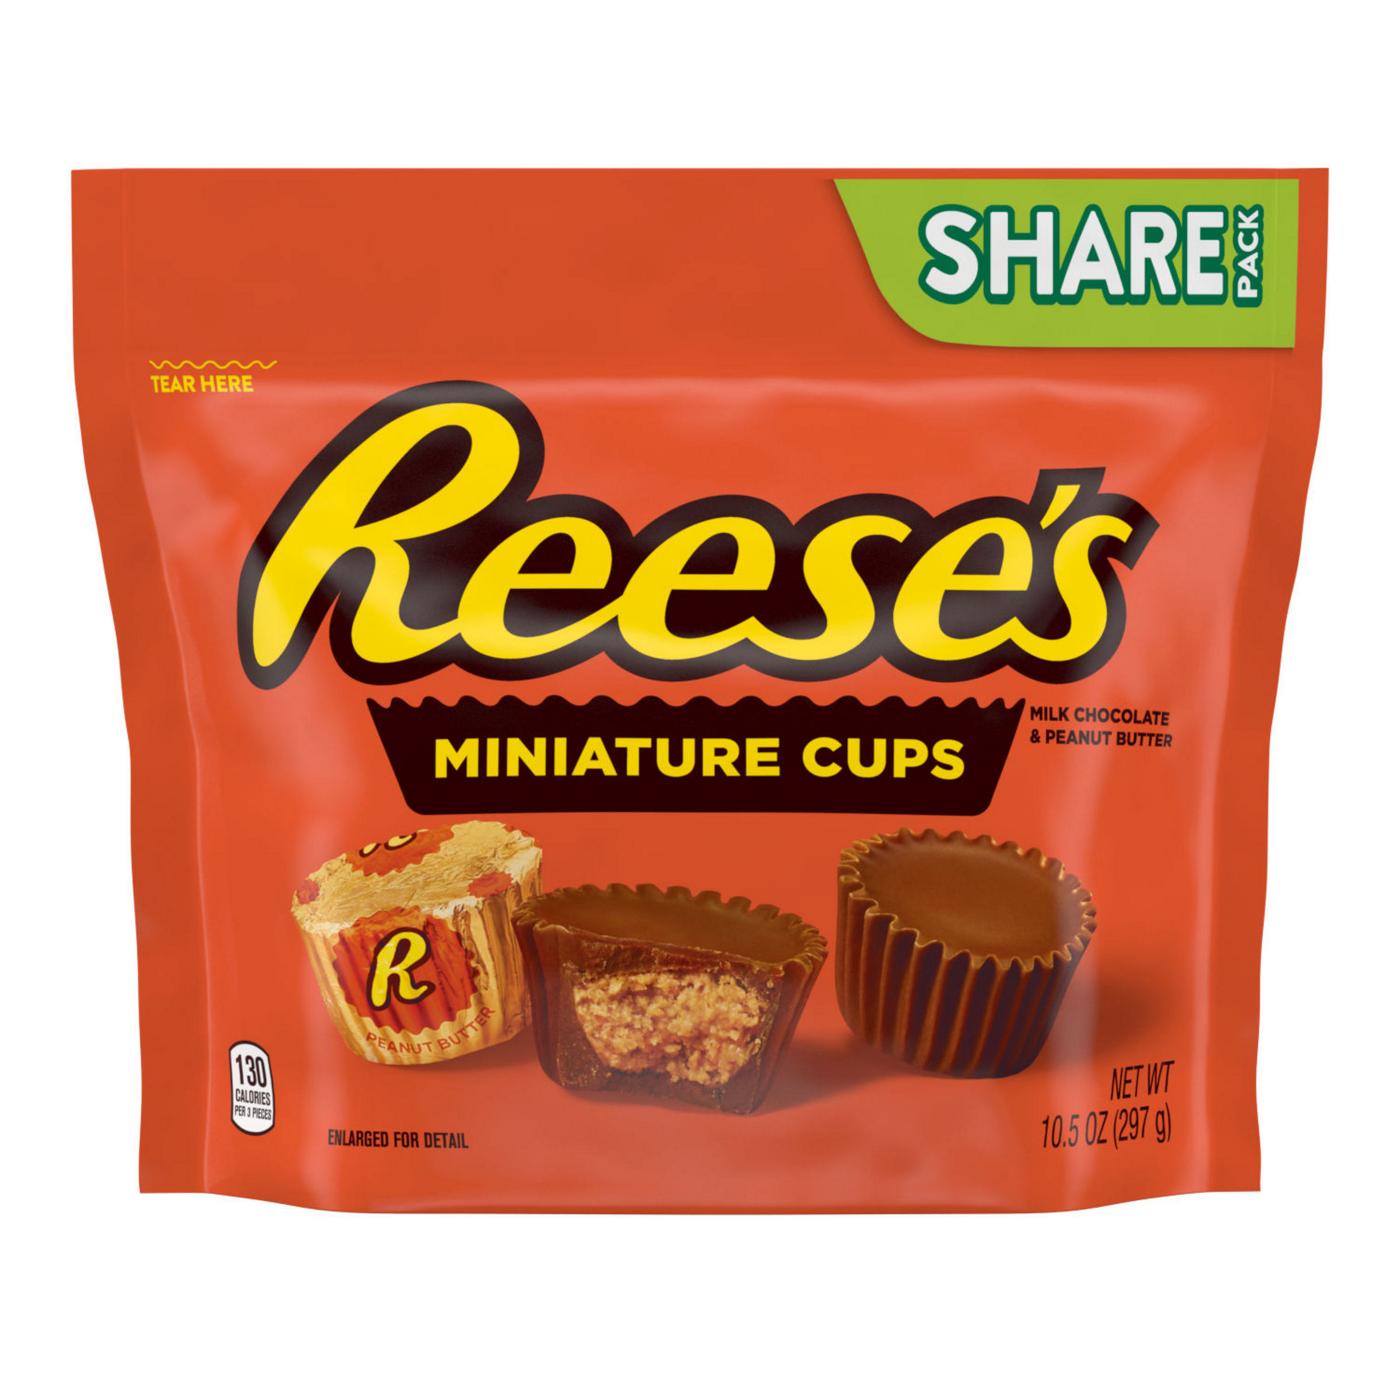 Reese's Miniature Peanut Butter Cups Candy - Share Pack; image 1 of 7